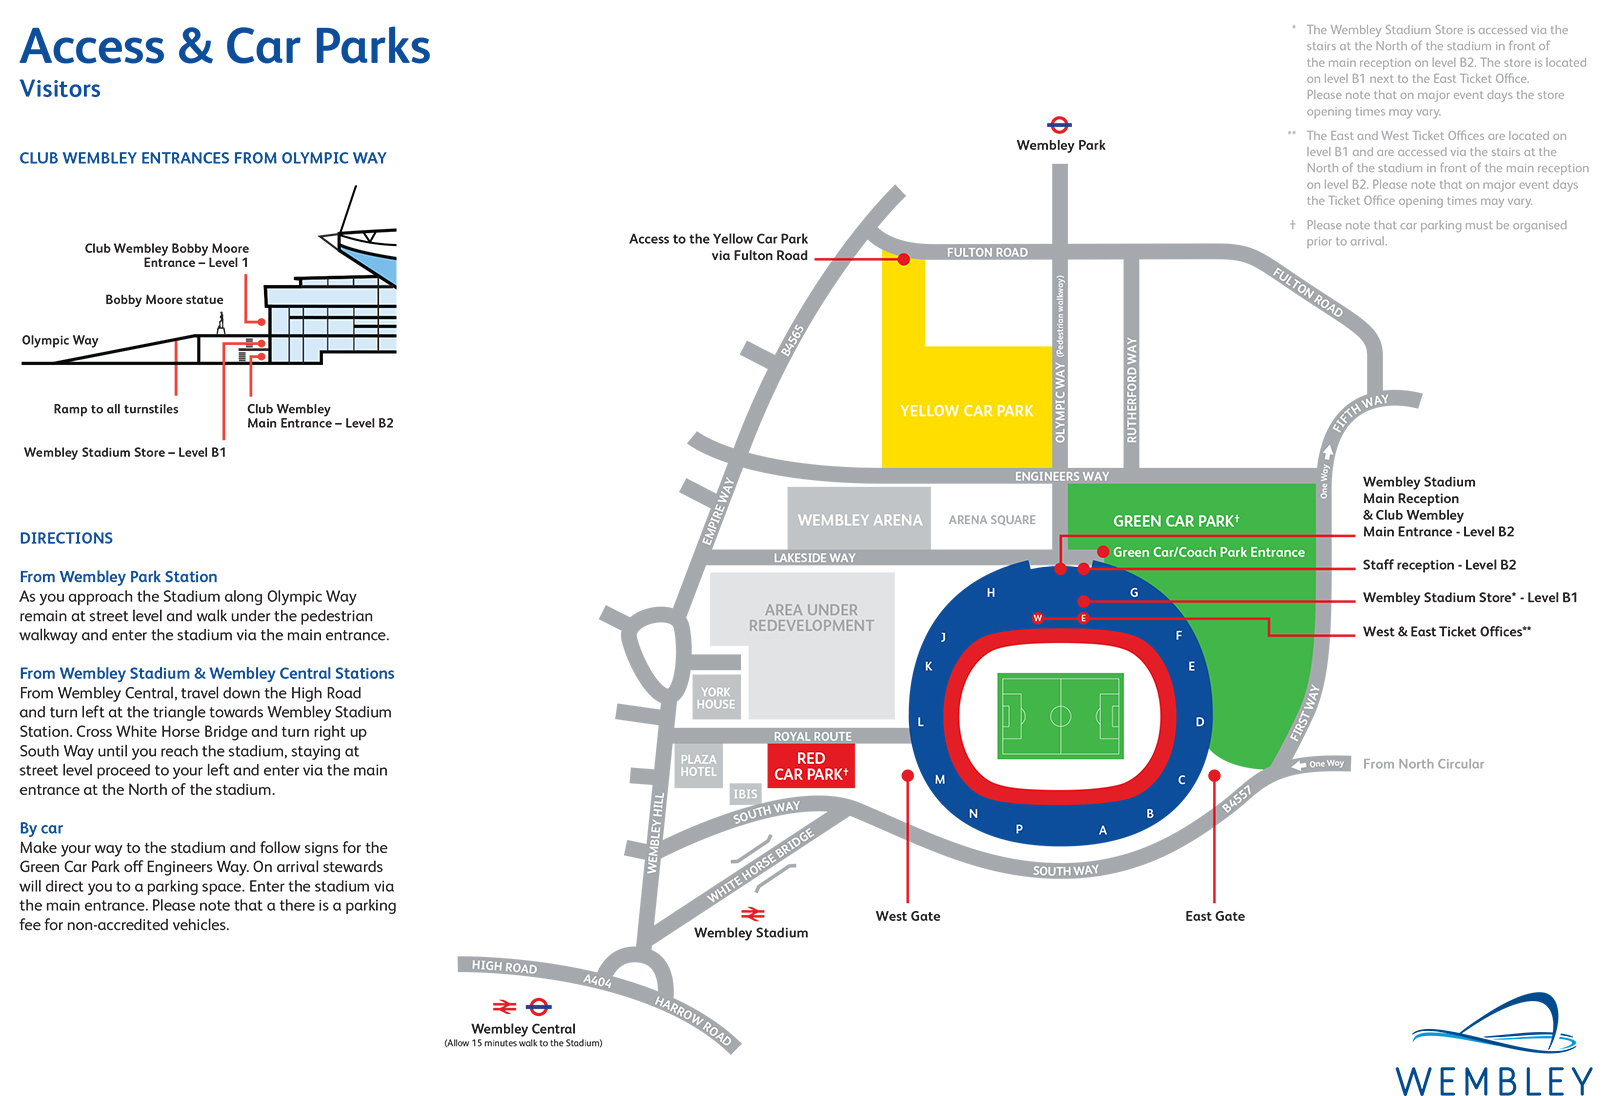 Wembley Stadium seating plan Visitors access and car parks red green yellow